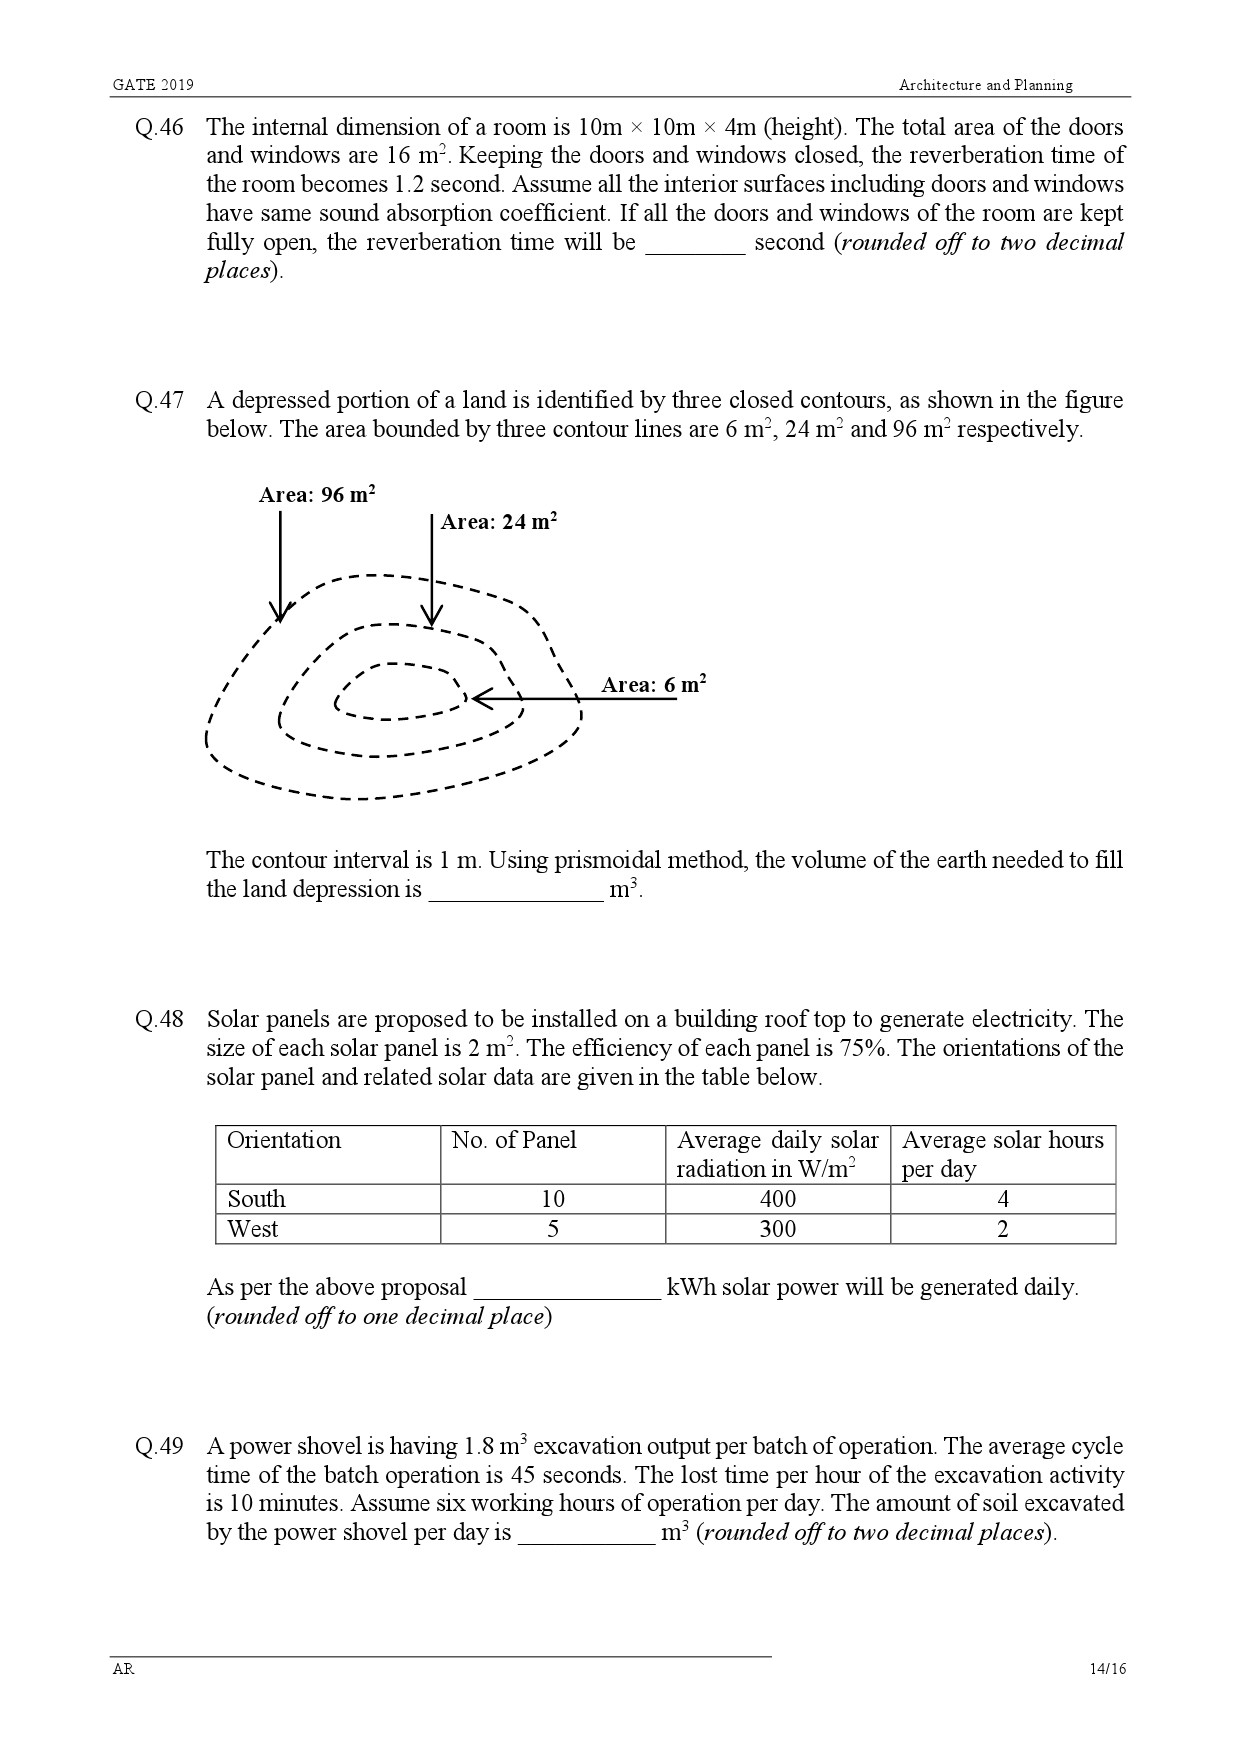 GATE Exam Question Paper 2019 Architecture and Planning 17